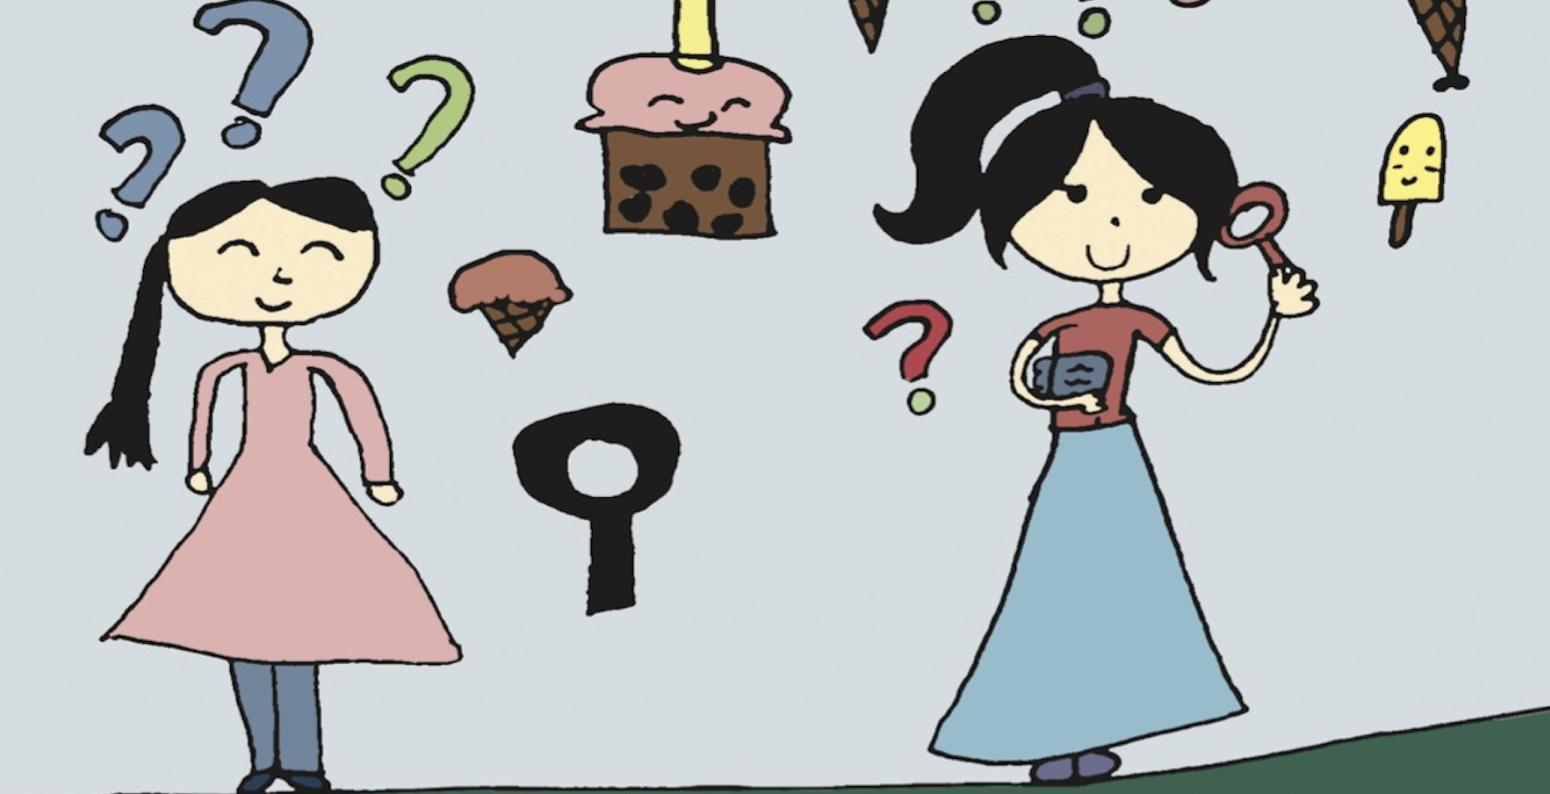 Illustration of sisters Emma and Belley standing and smiling, surrounded by floating question marks and ice cream cones.